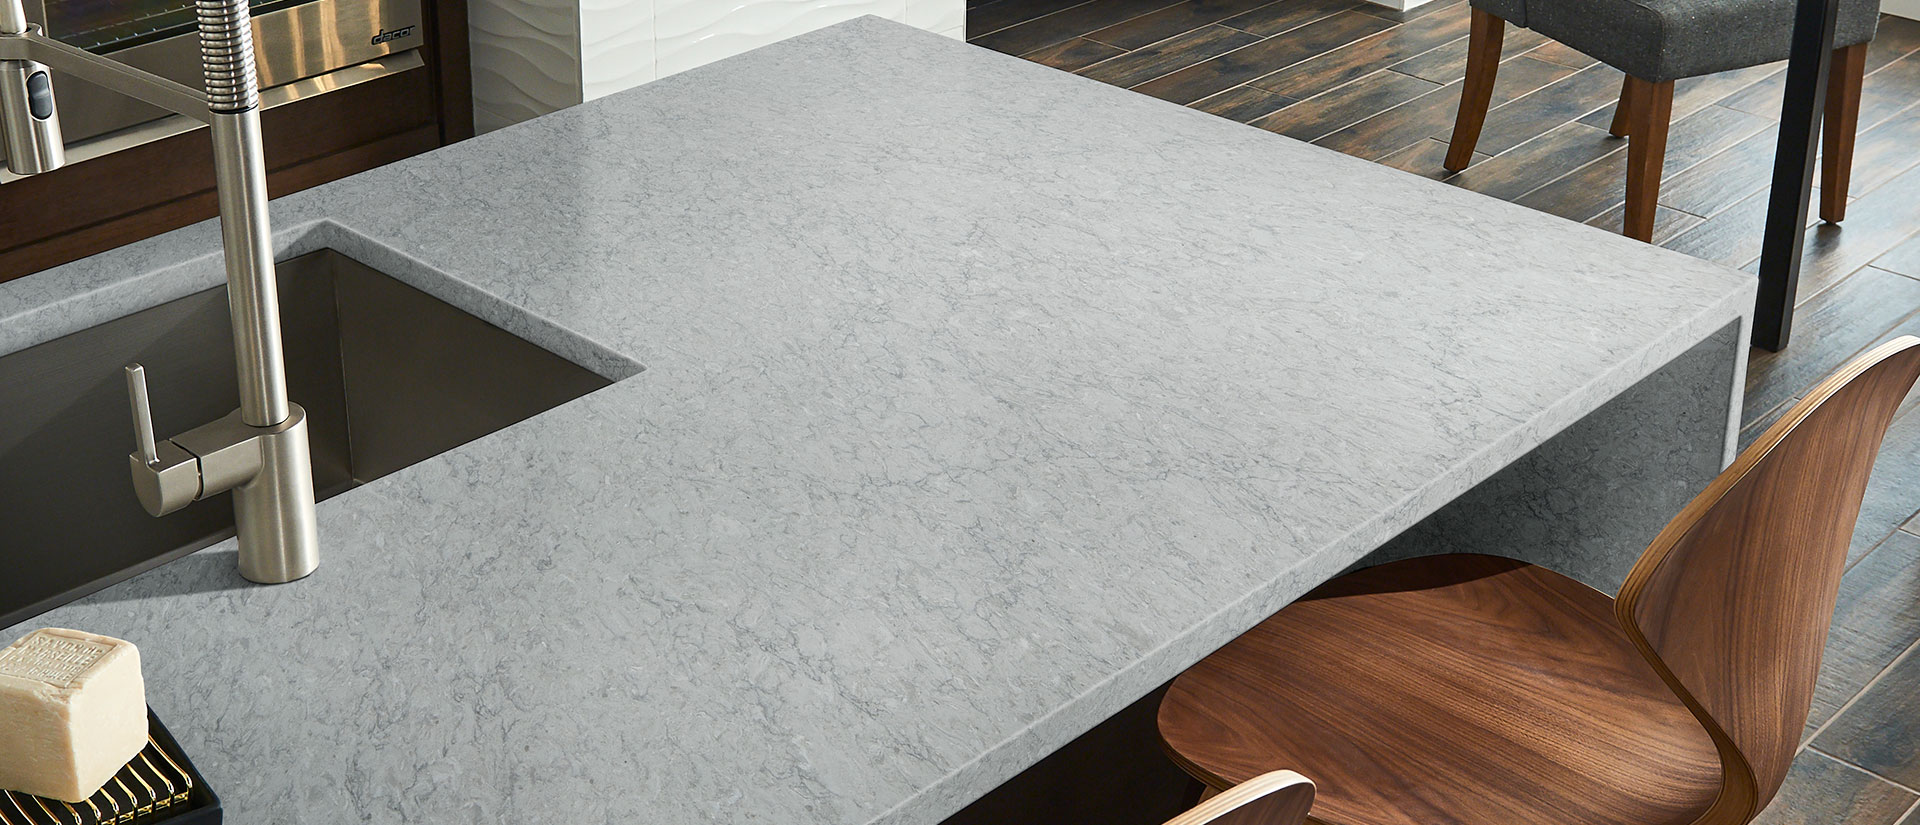 Galant Gray Quartz countertop in a contemporary kitchen with warm wood accents